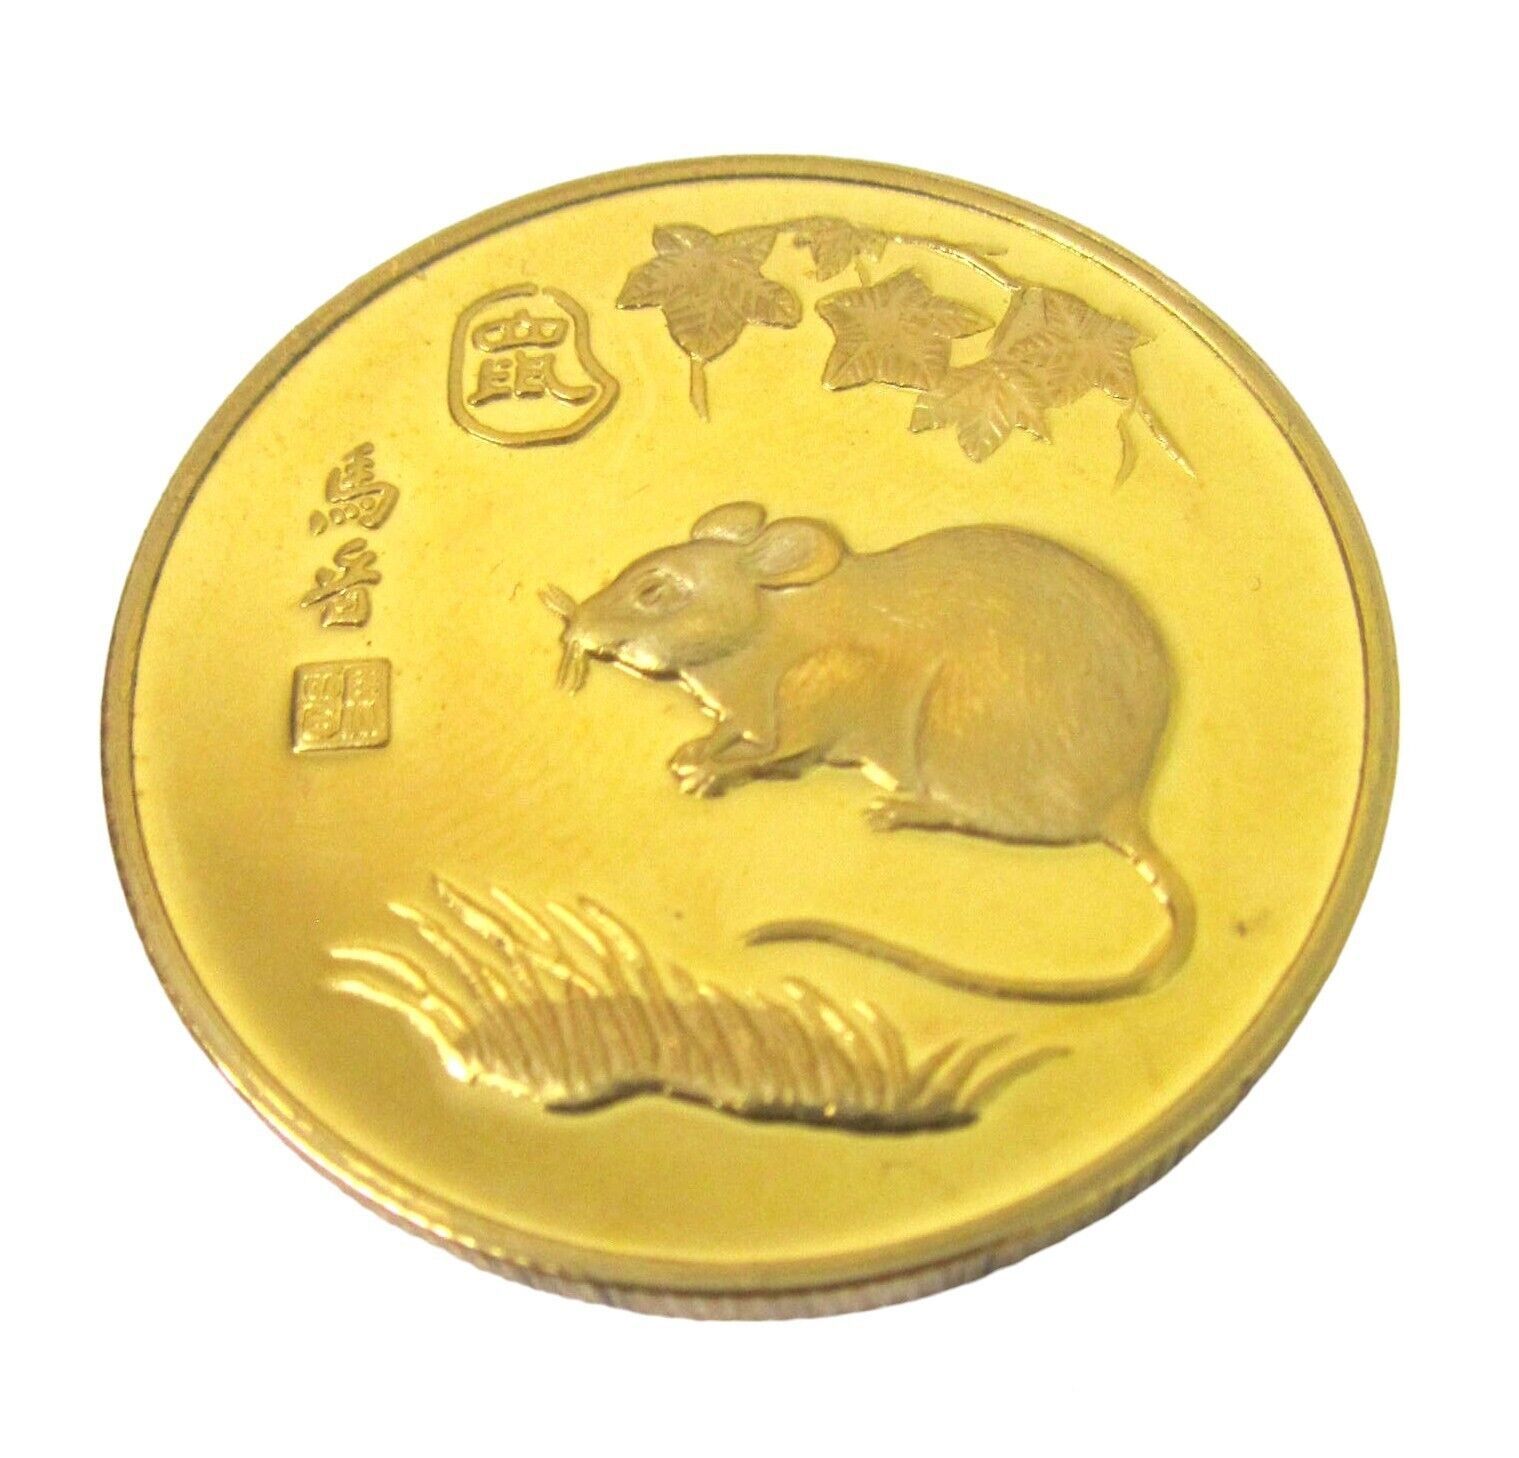 Primary image for Vintage Chinese Zodiac 24k gilded Gold Coin Tokens Rat Lunar 1998 Yunnan Forest